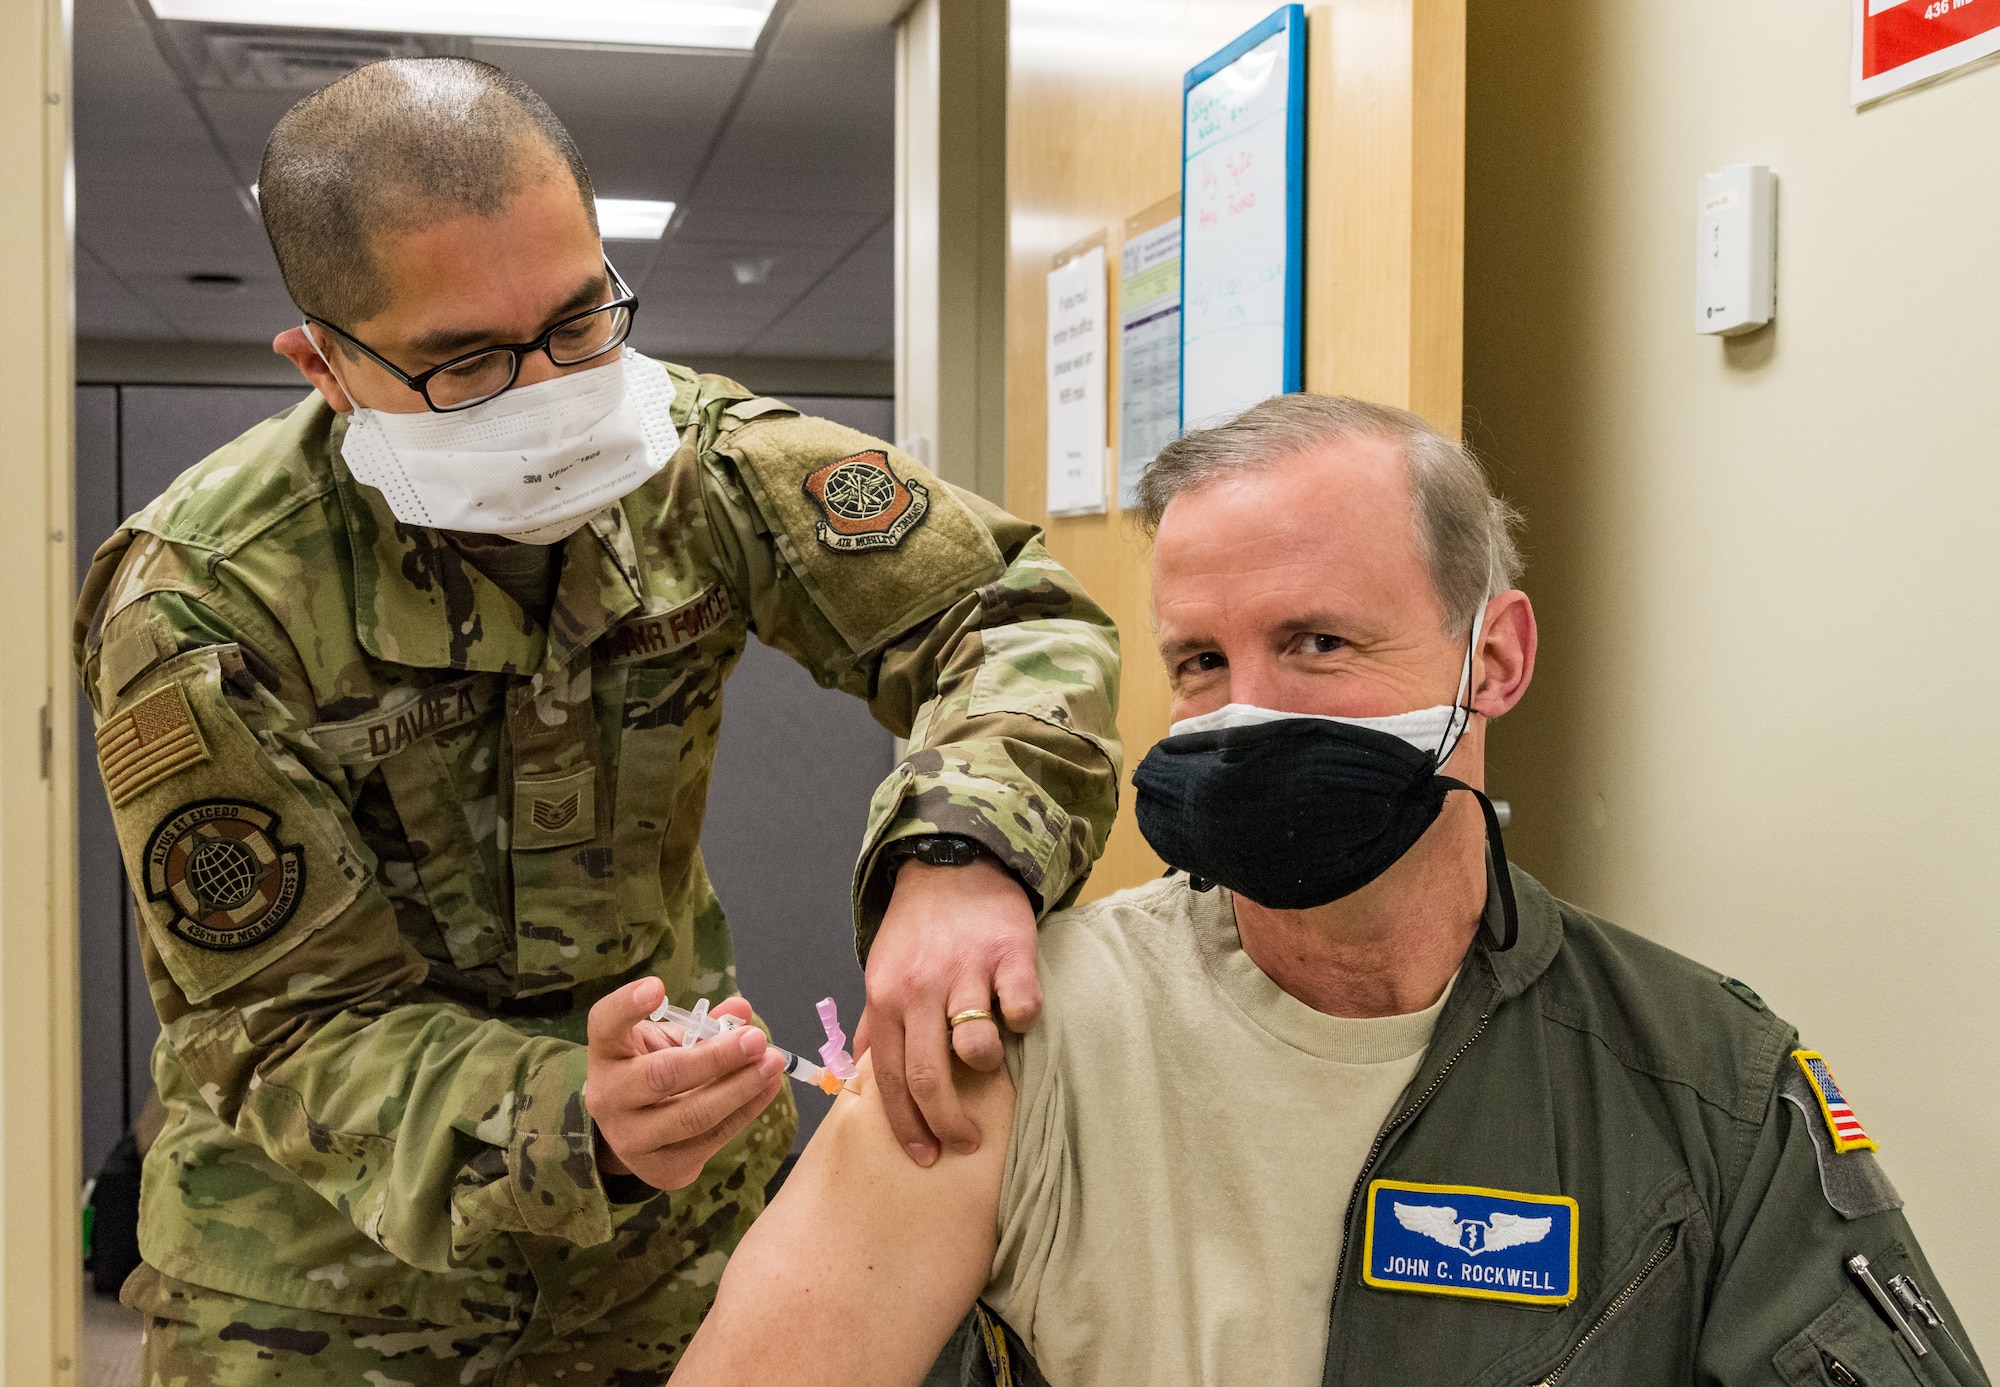 Col. John Rockwell, 436th Medical Group chief of aerospace medicine, is administered the COVID-19 vaccine by Tech. Sgt. Juan Davila, 436th Operational Medical Readiness Squadron flight operational medicine noncommissioned officer in charge, Jan. 15, 2021, at Dover Air Force Base, Delaware. As the 436th Airlift Wing public health emergency officer, Rockwell was among the first Team Dover frontline workers who voluntarily received the vaccine and were identified as eligible in concurrence with Department of Defense guidance. (U.S. Air Force photo by Roland Balik)